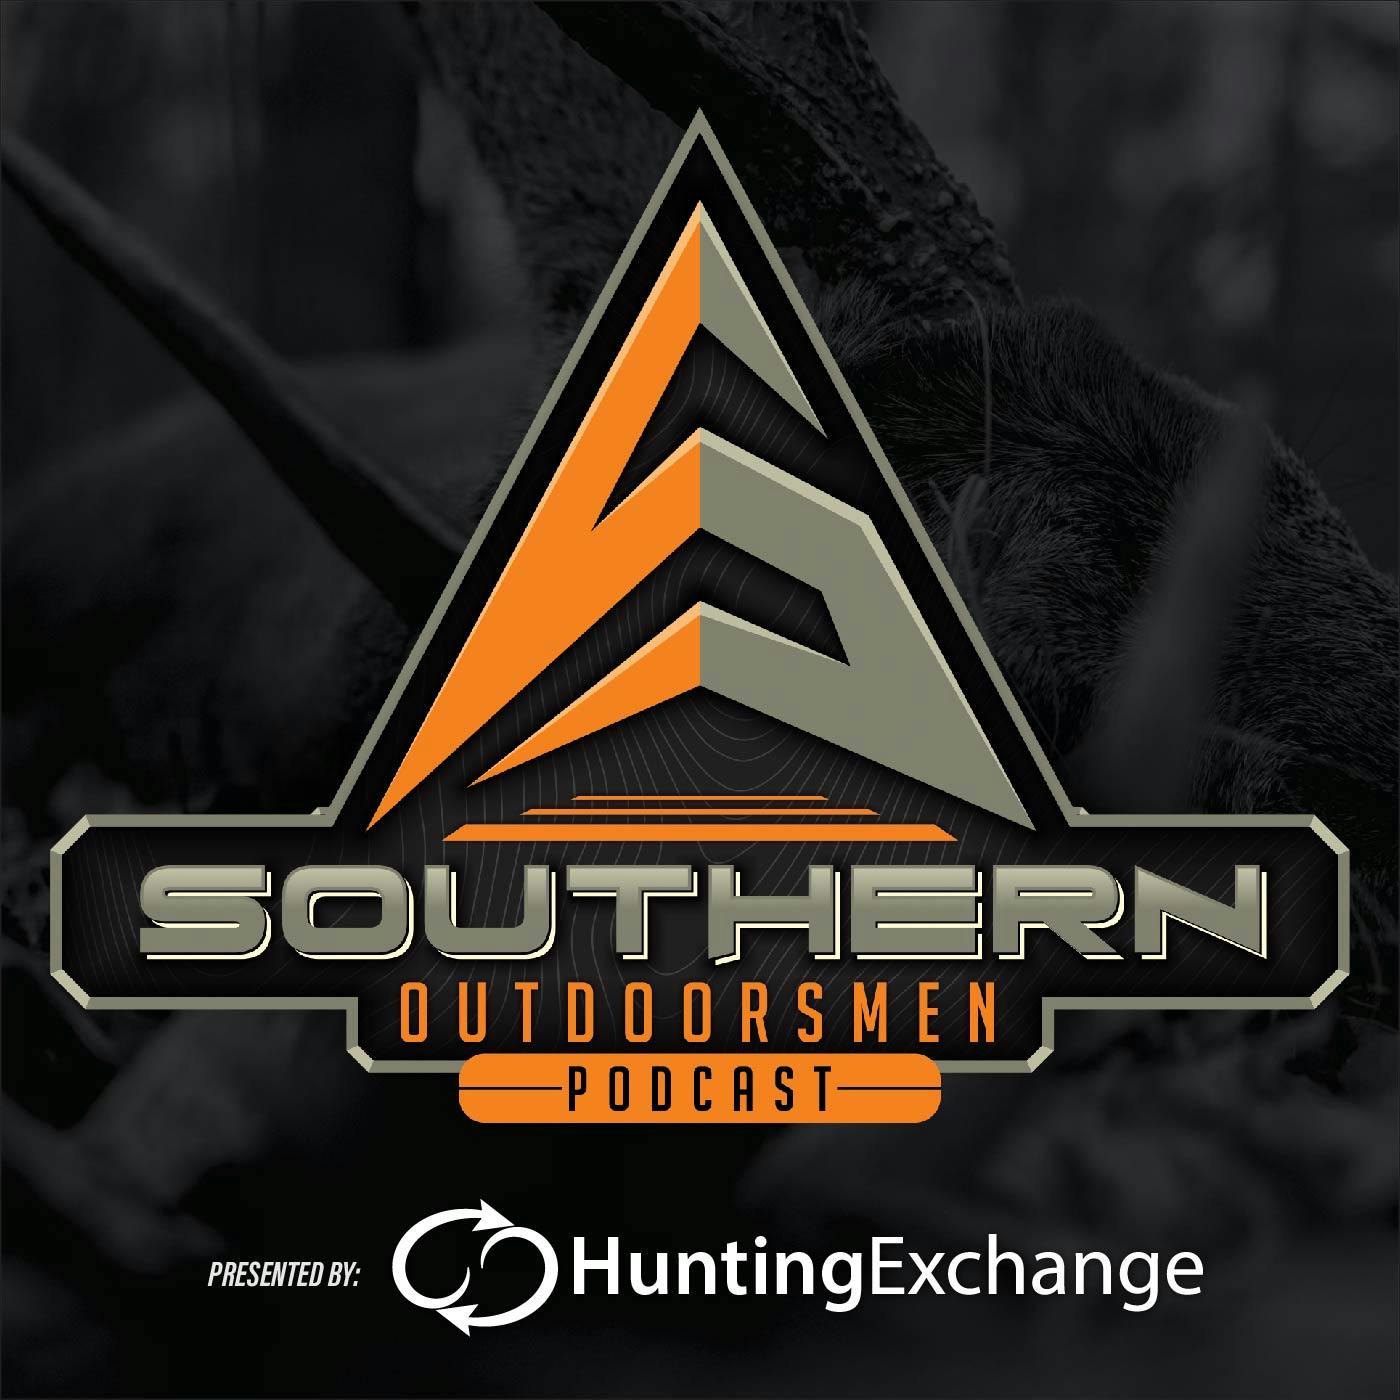 Ep. 246 - The ART of Hunting the TOUGH TURKEYS with Jared Smith